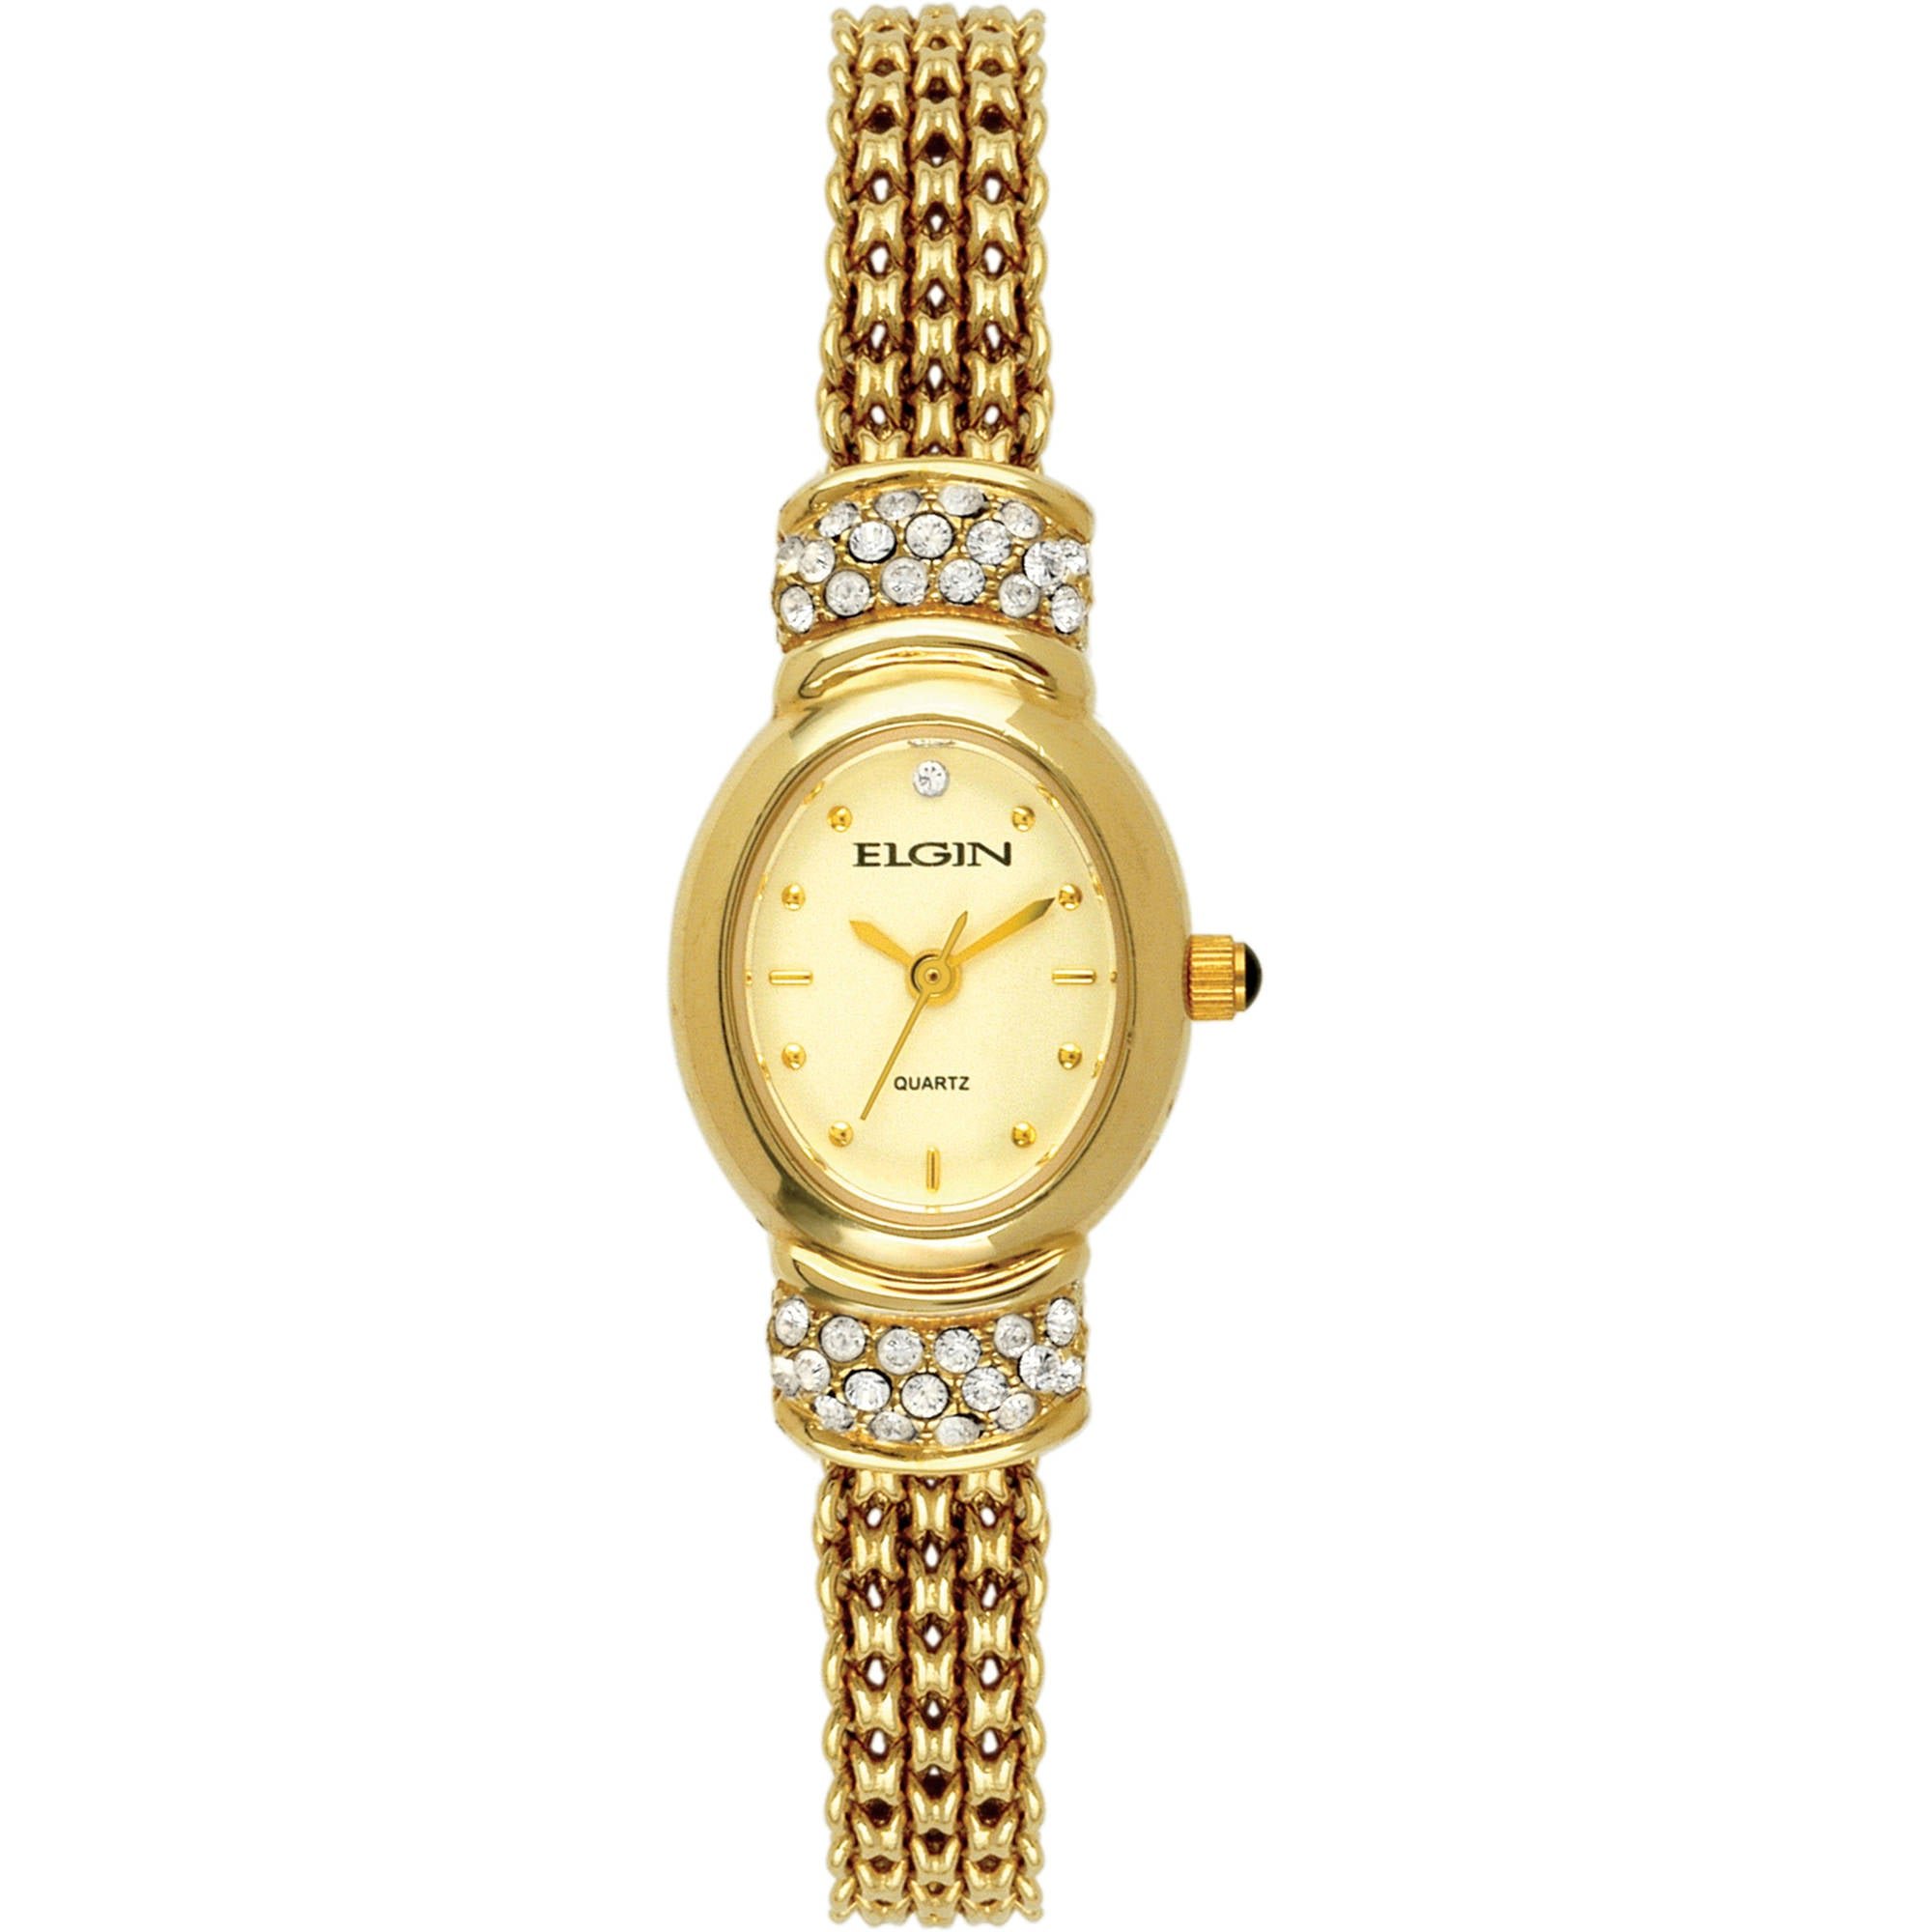 Model: Women's Elgin Gold-Tone Watch with Oval Case and Champagne Dial and Crystal Accented Mesh Bracelet